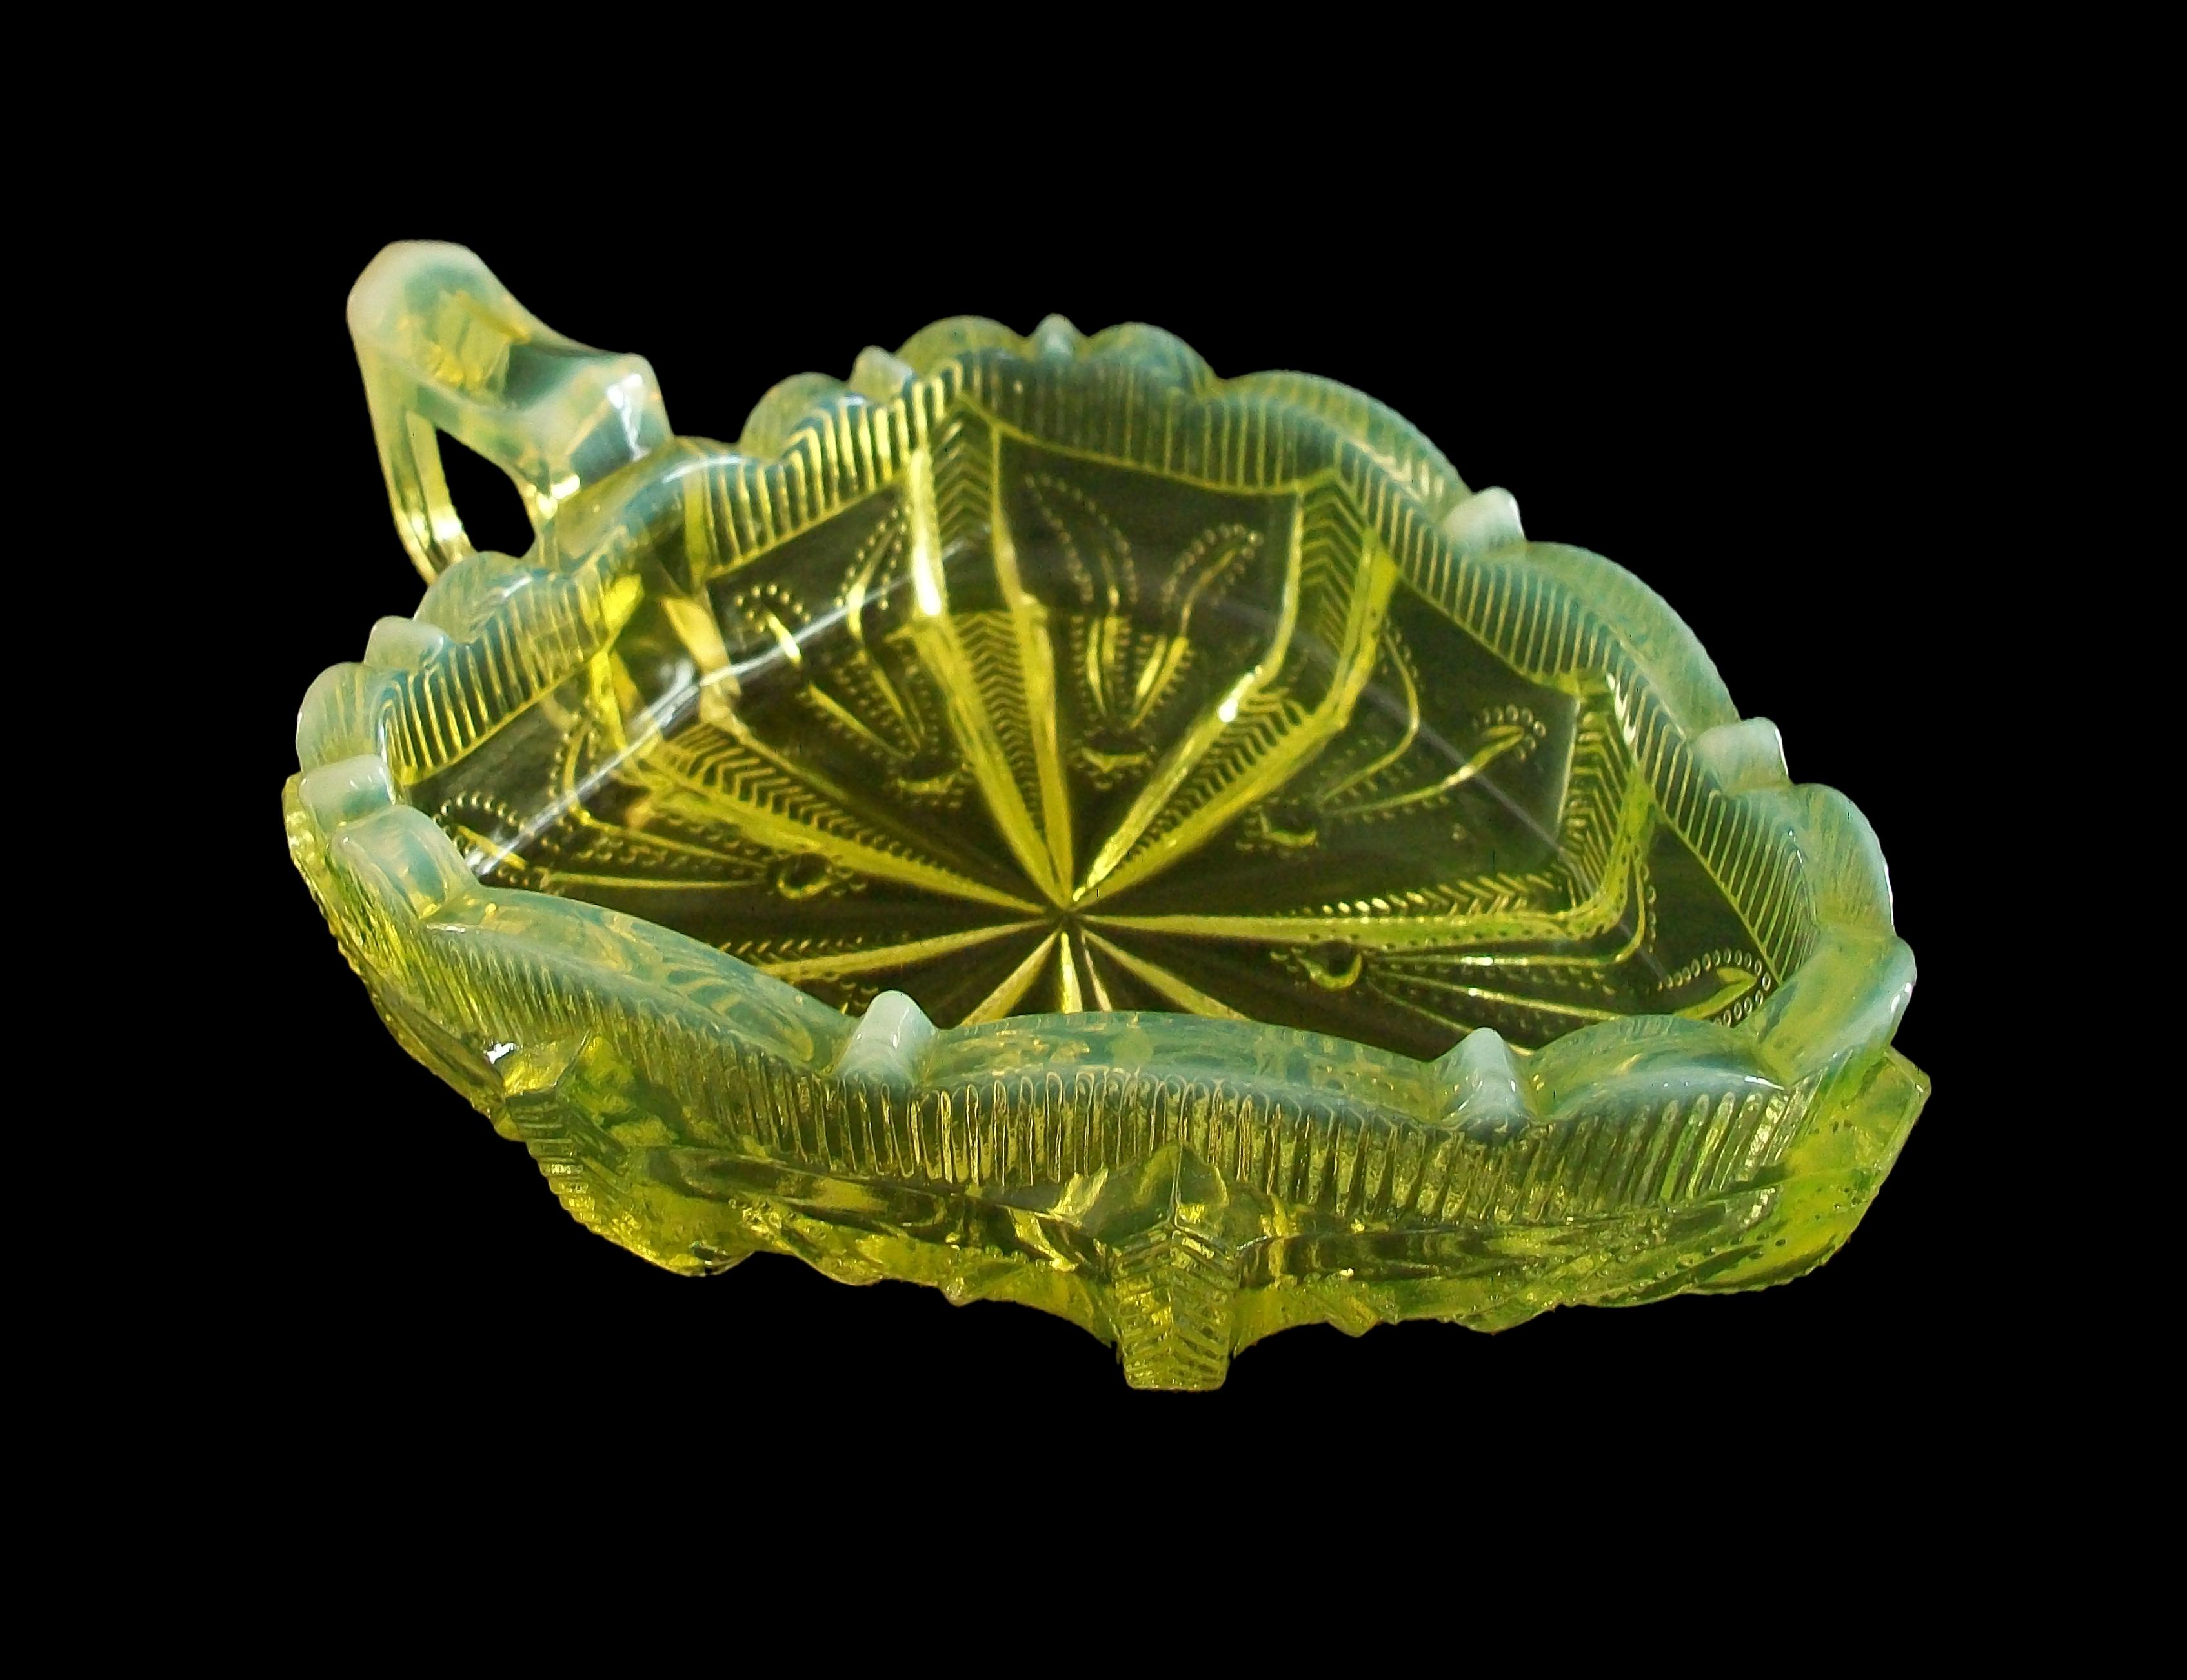 Fenton - Antique American opalescent yellow Vaseline glass cactus leaf relish or pickle dish - unsigned - United States - early 20th century.

Excellent antique condition - no loss - no damage - no cracks - no chips - no restoration - minimal